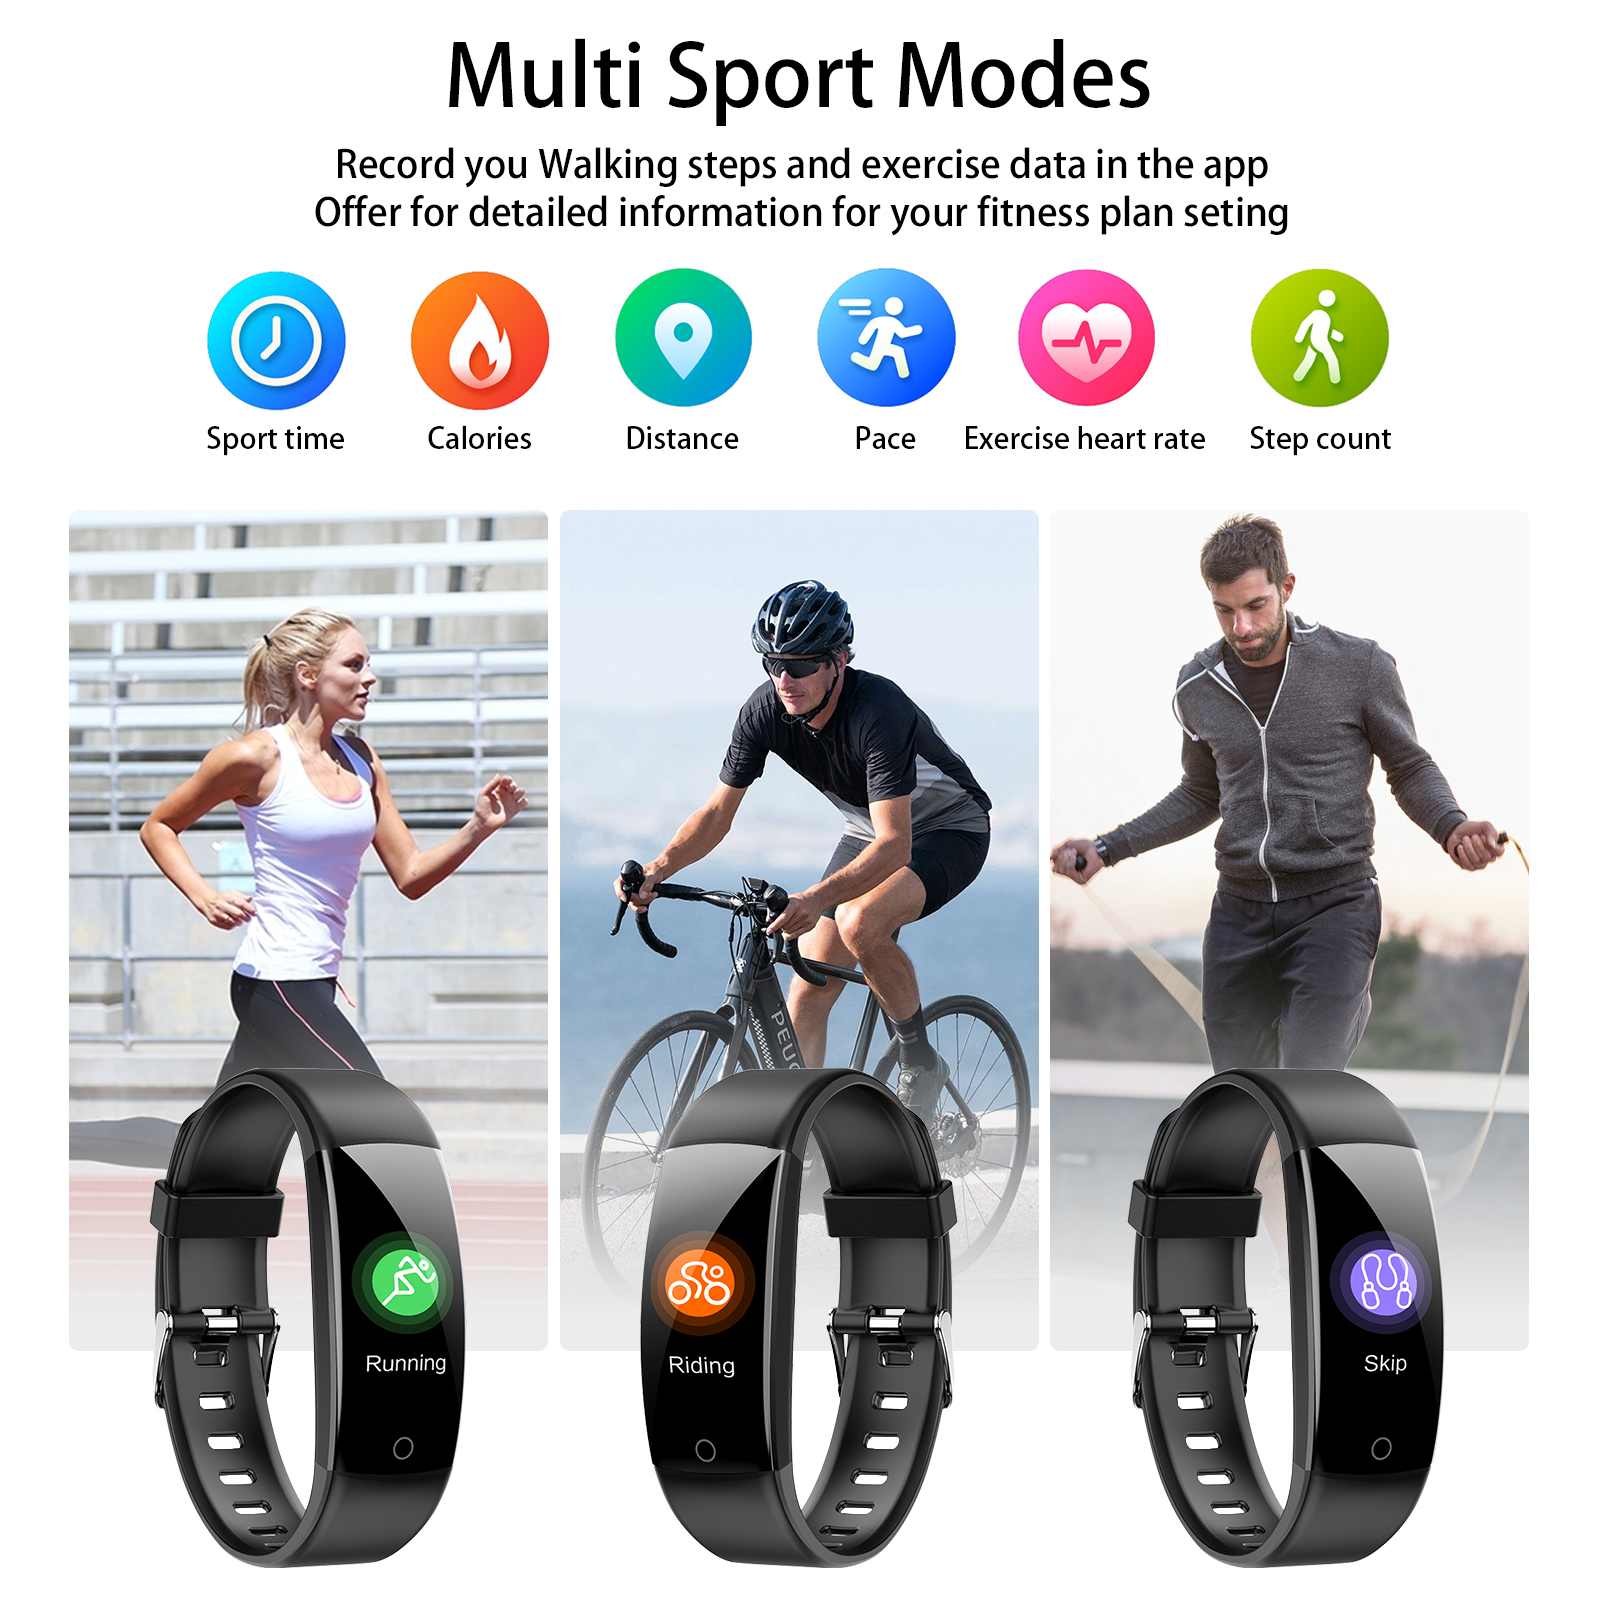 AGPTEK Waterproof Fitness Tracker with Heart Rate Monitor, Activity Monitor Smart Wristband for IOS Android Smartphone - image 2 of 8